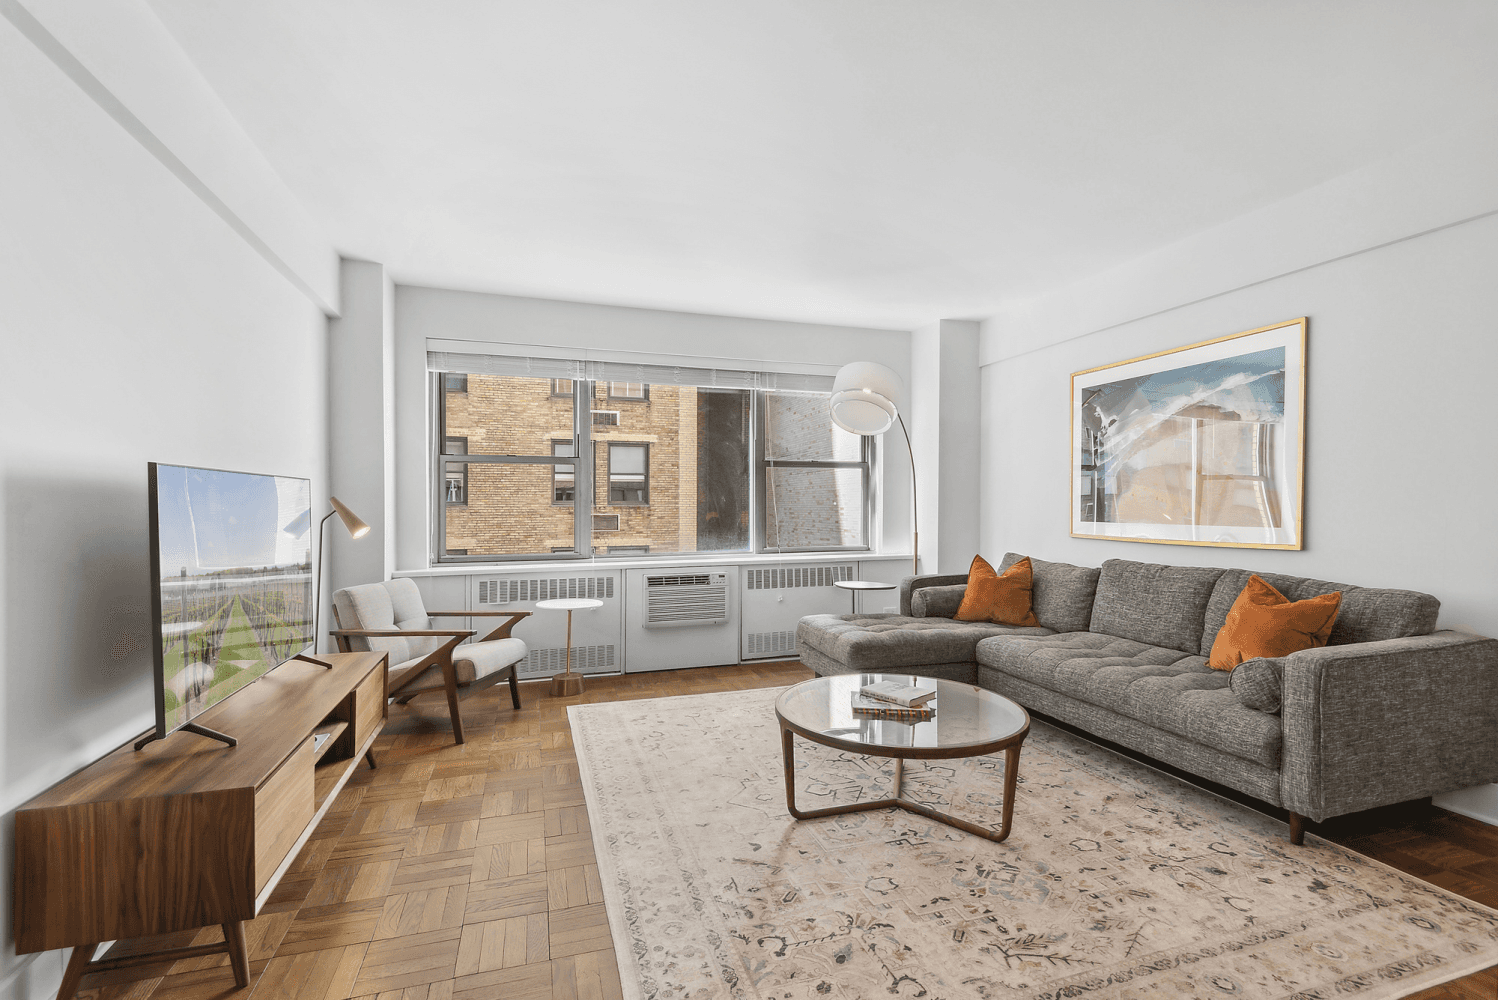 Location, Space, and Low Monthies110 East 57th Street is a full service building, with an elegant entrance, and ideally situated off the corner of Park Avenue and East 57th Street.